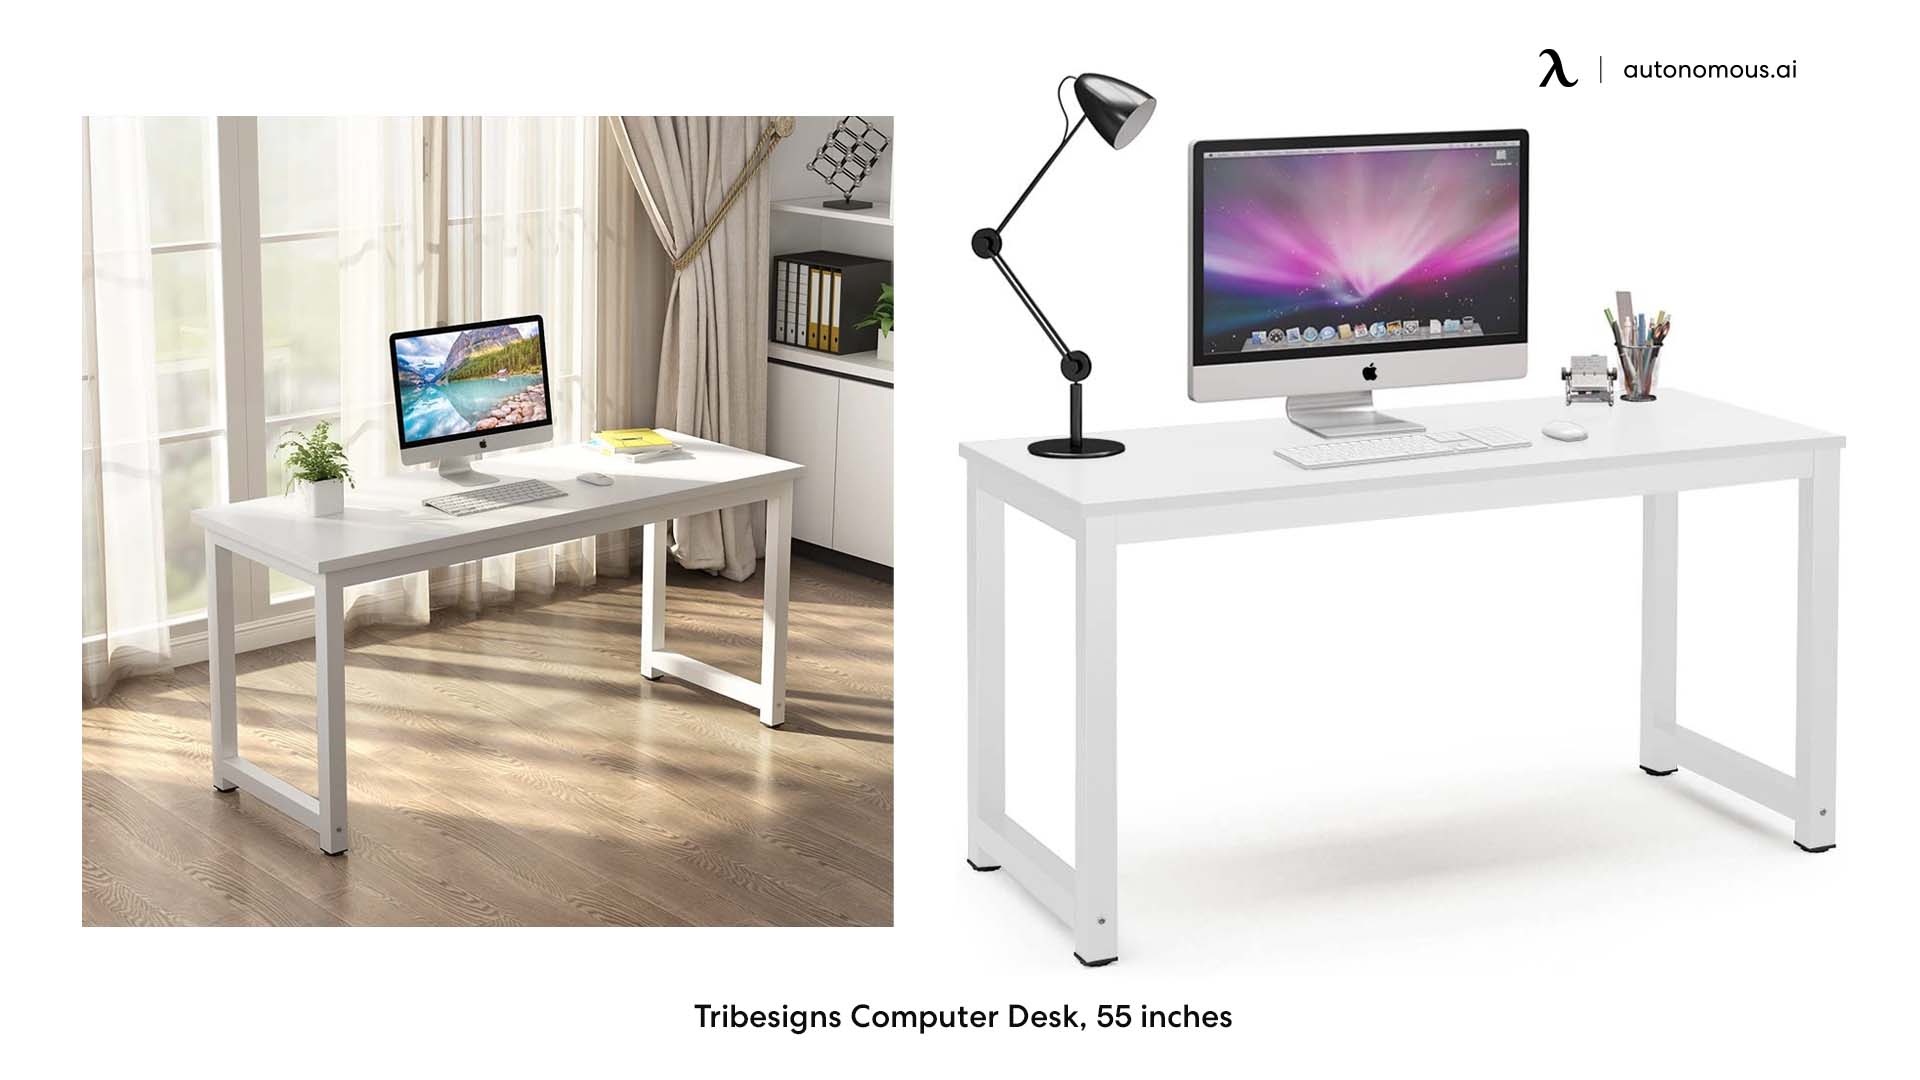 Tribesigns Computer long white desk, 55 inches